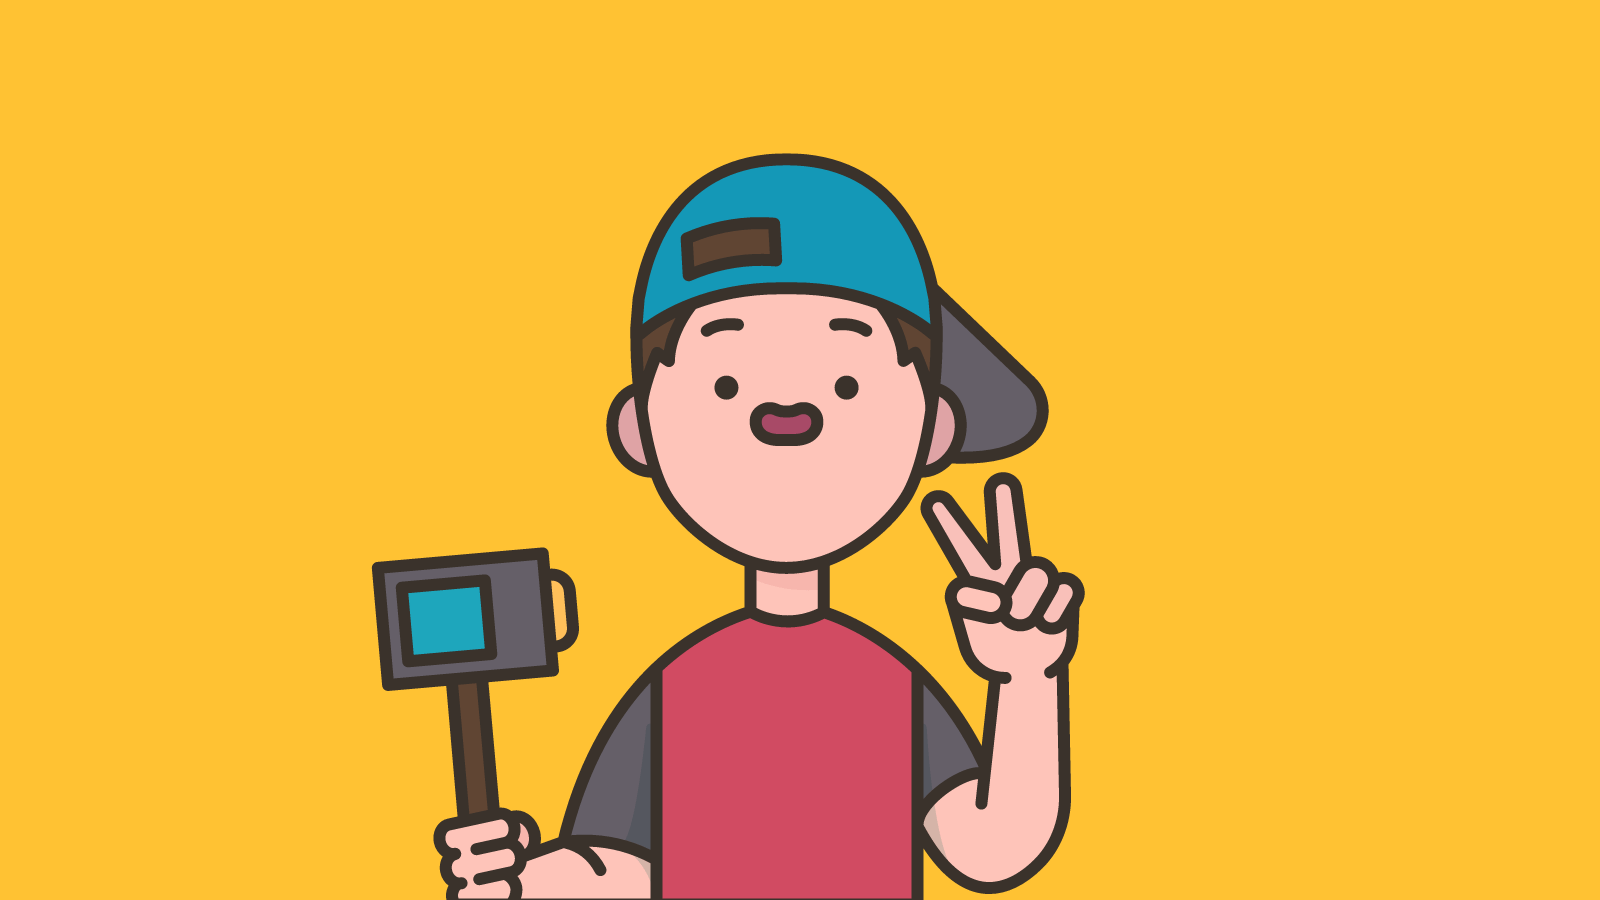 A boy in a backwards baseball cap filming himself with a selfie stick and holding up a peace sign 